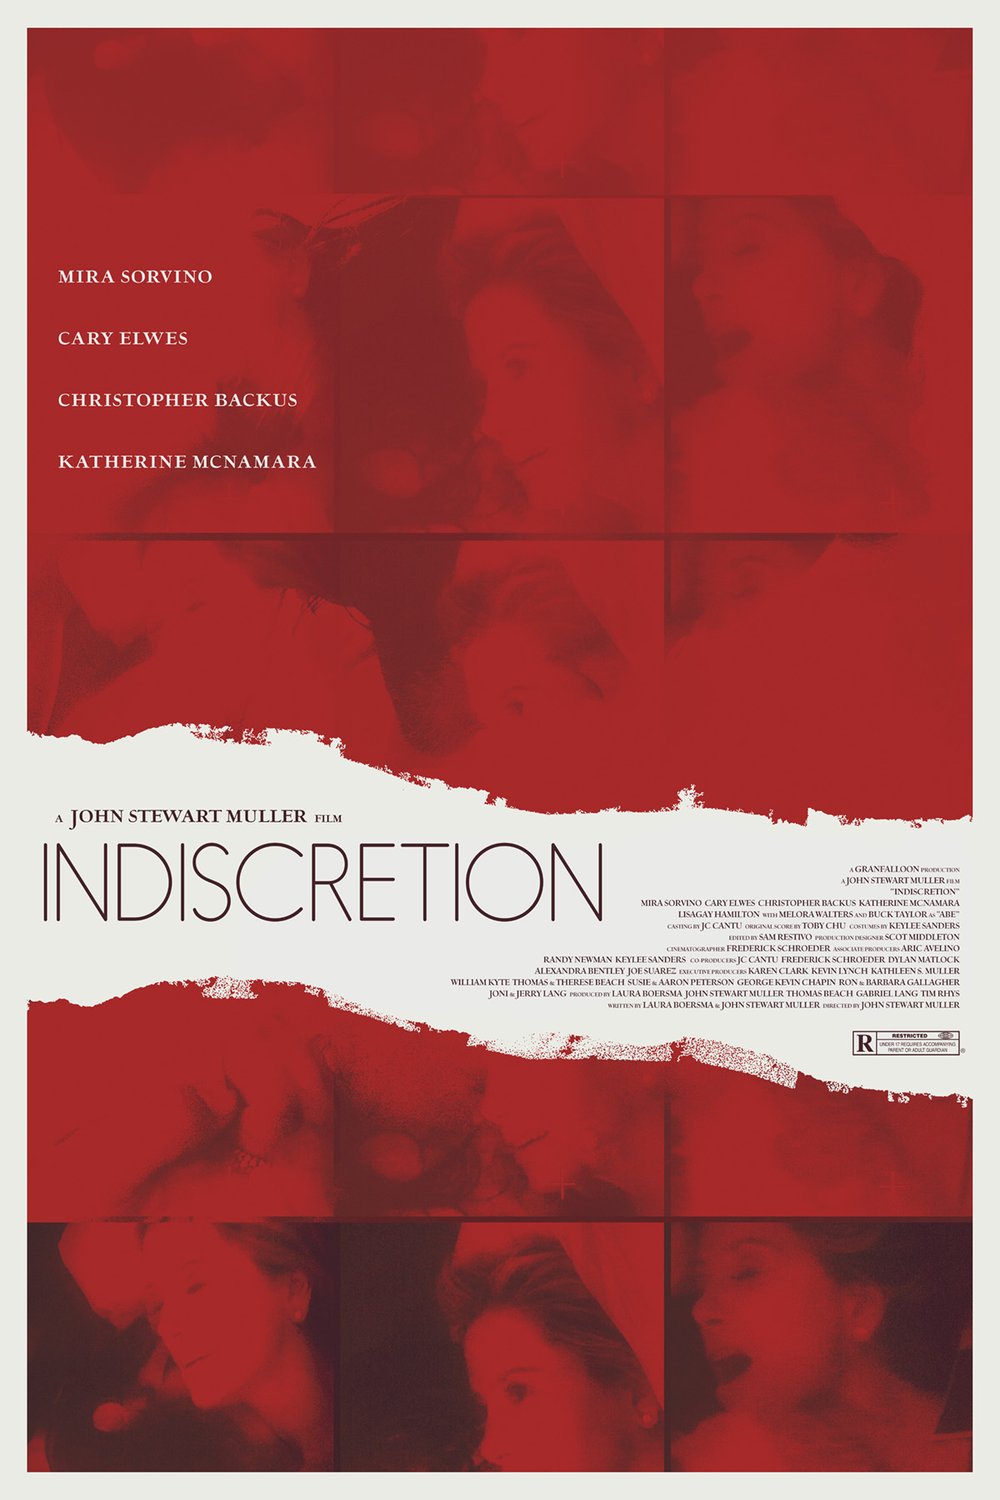 Poster of the movie Indiscretion